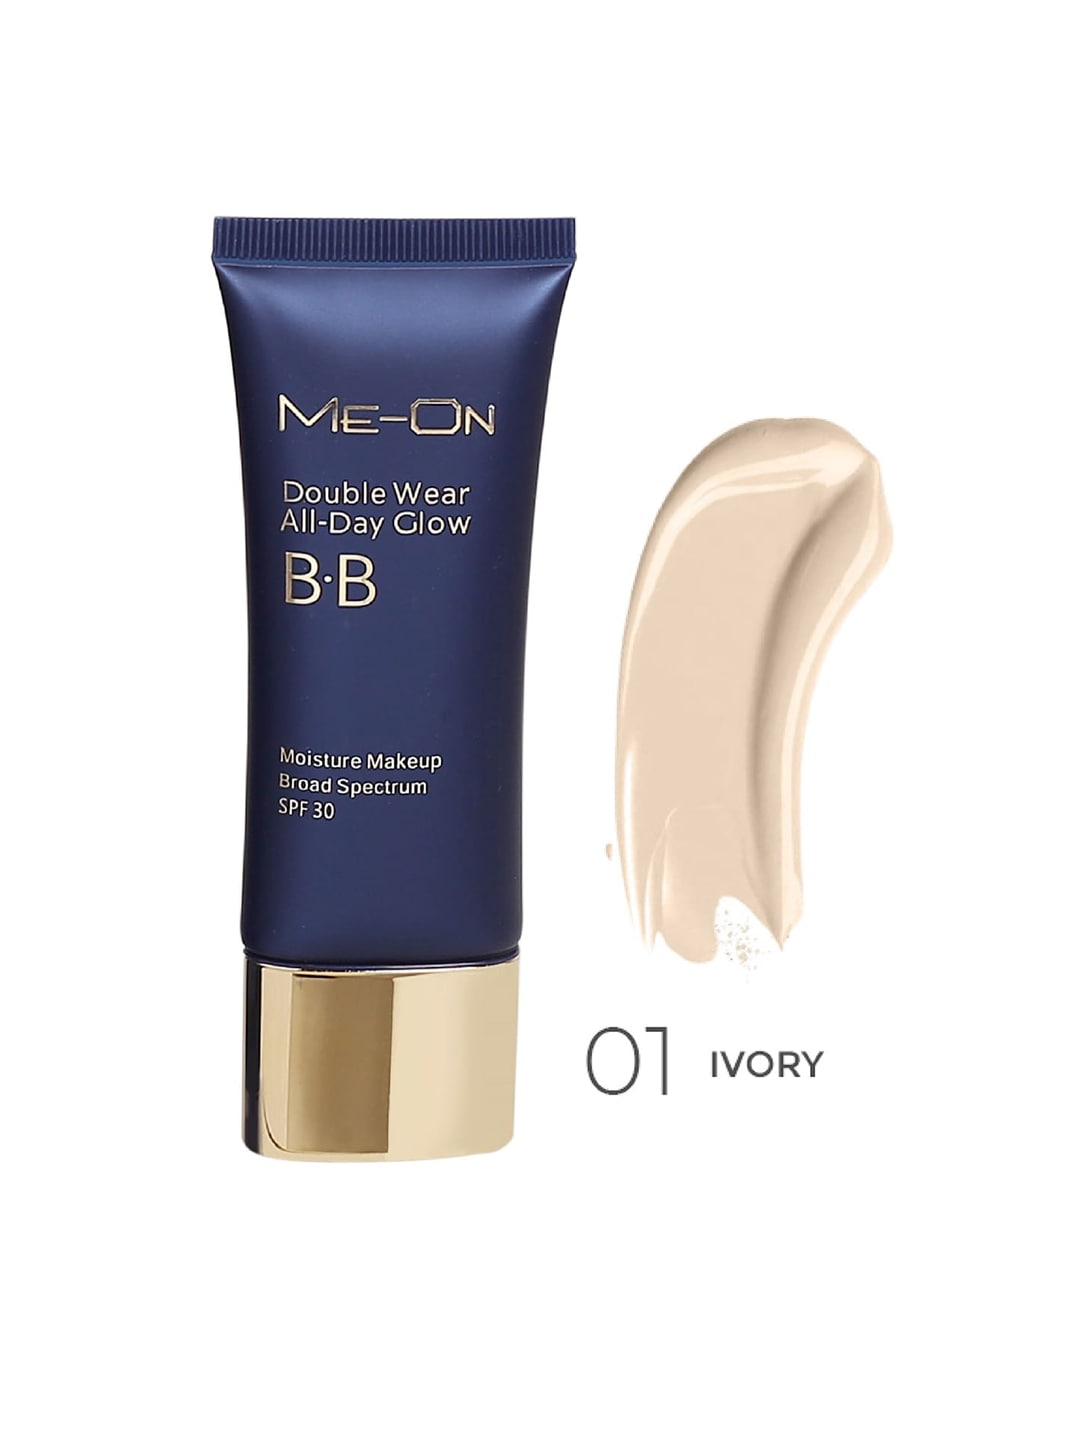 ME-ON New BB Foundation - Shade 01 Price in India